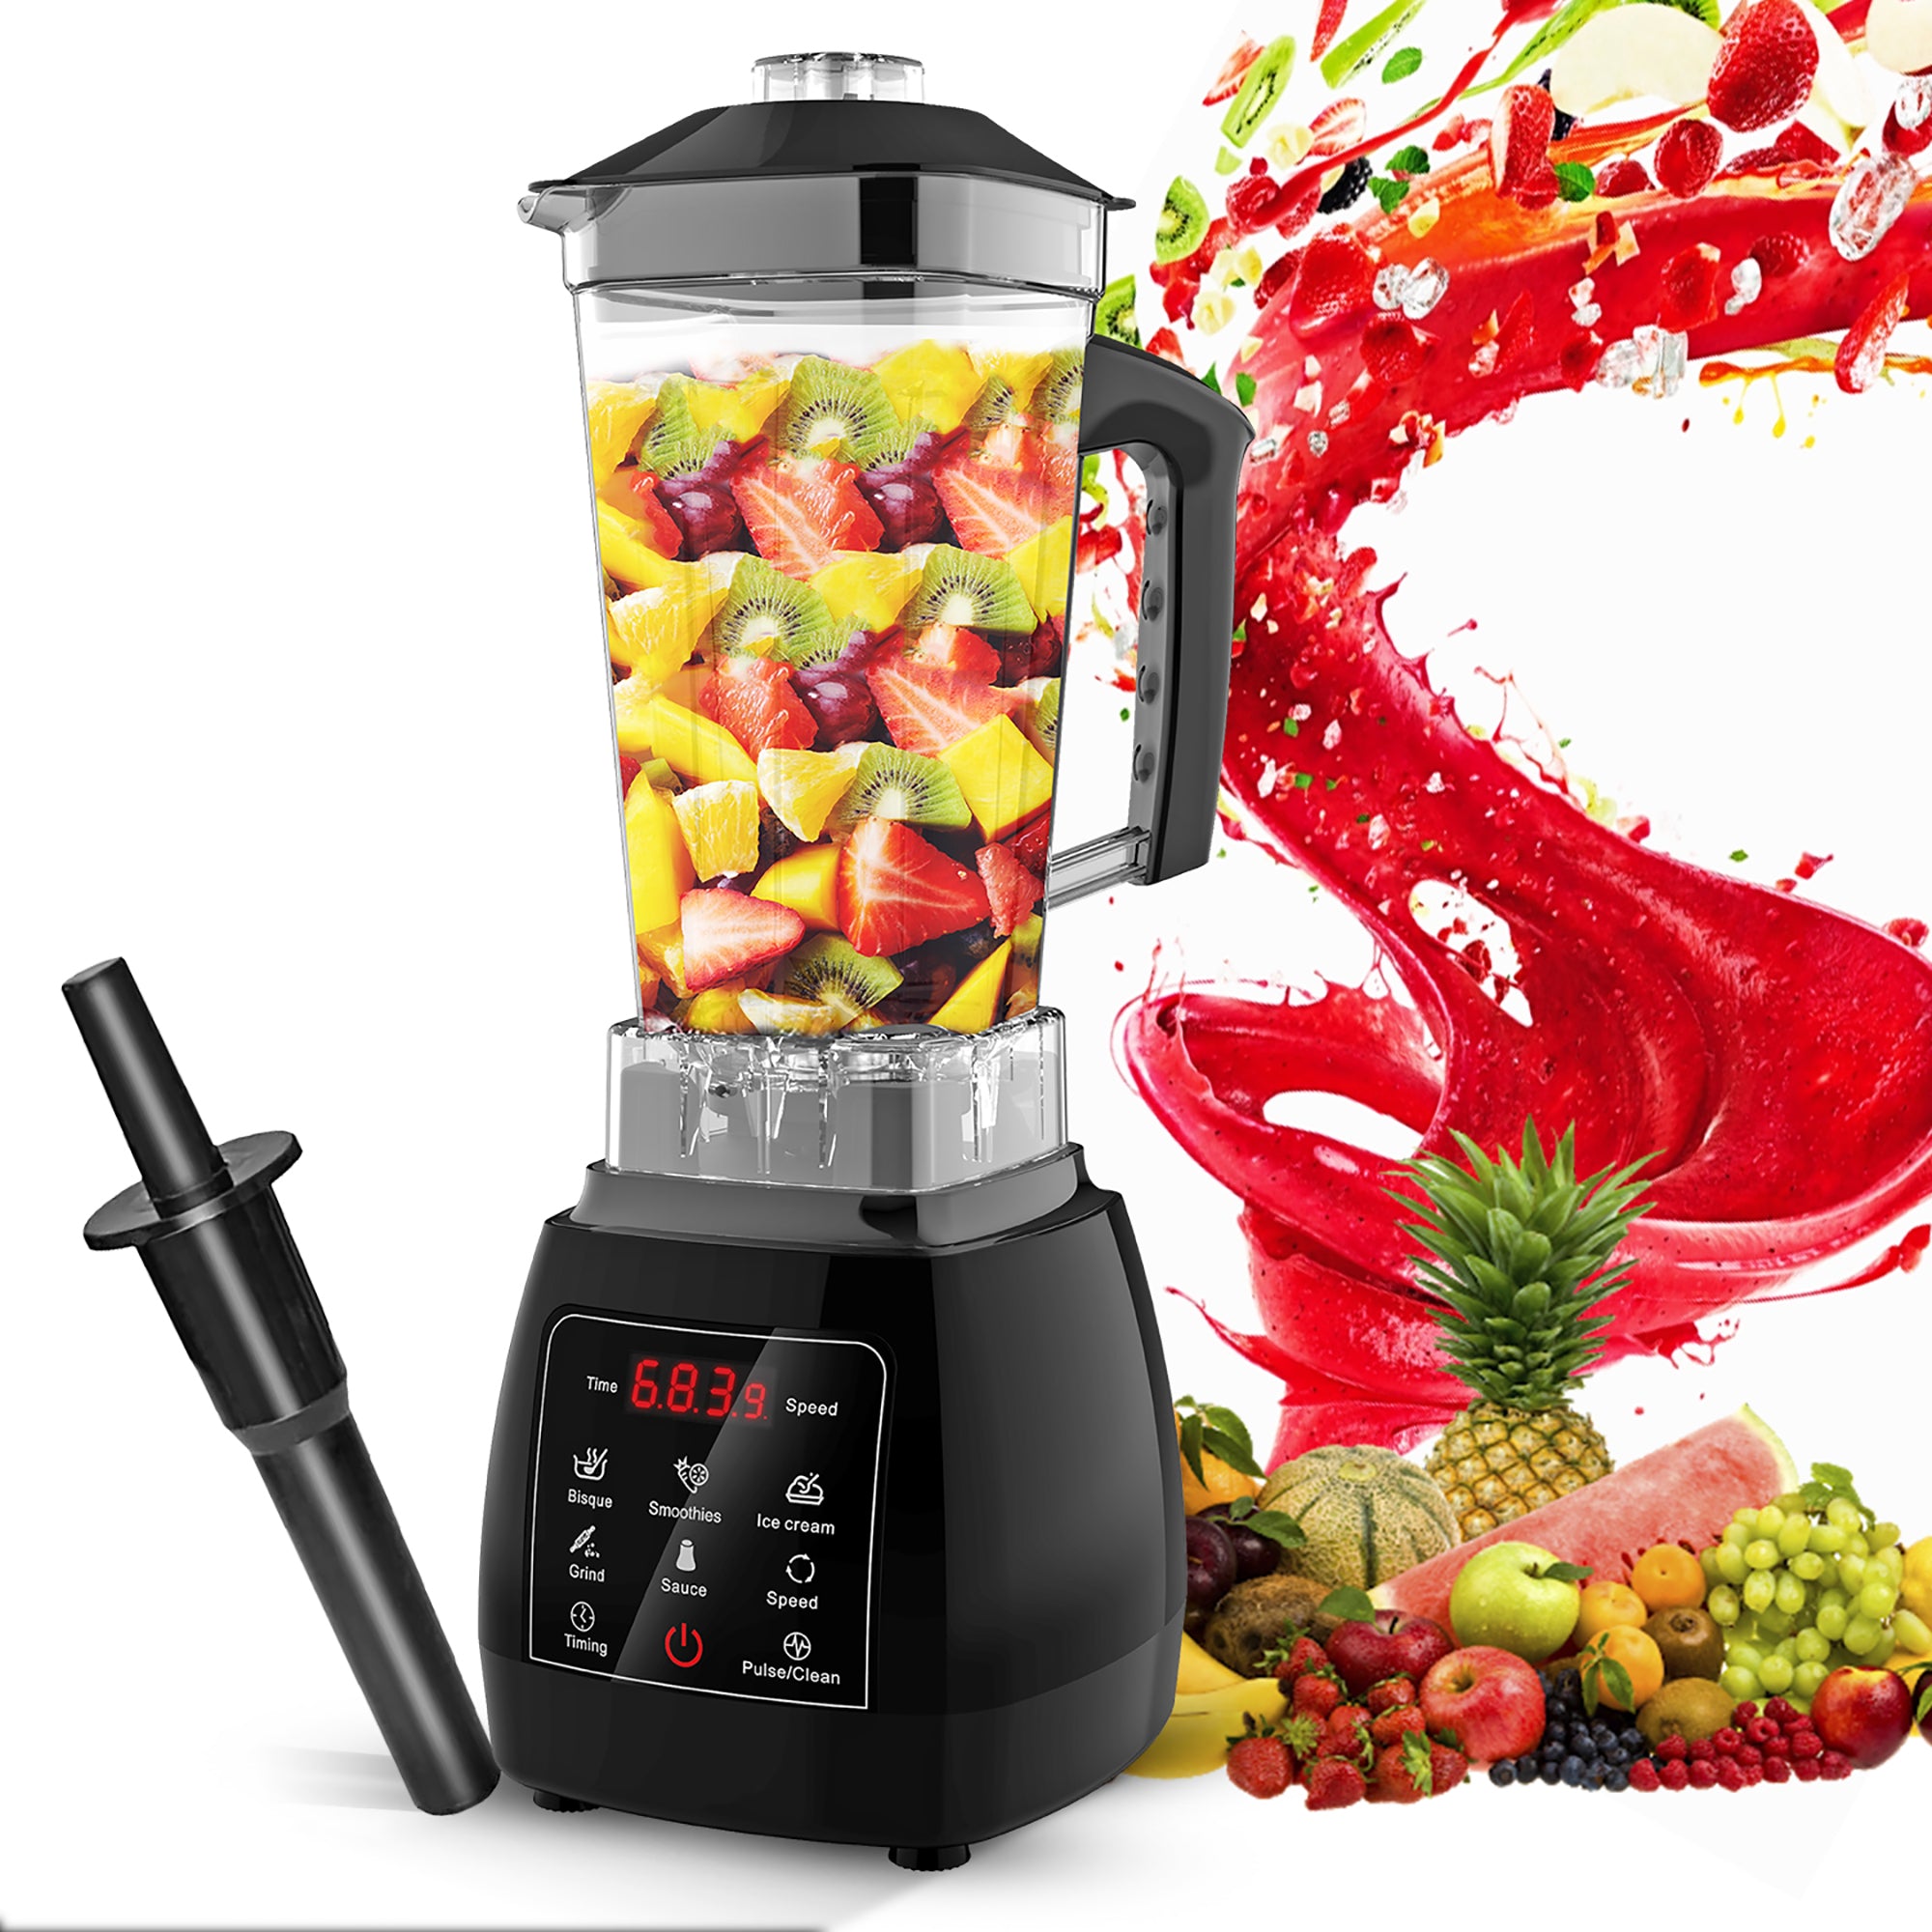 Best fresh Juice Blender Buy Online from 5 Core with free shipping.